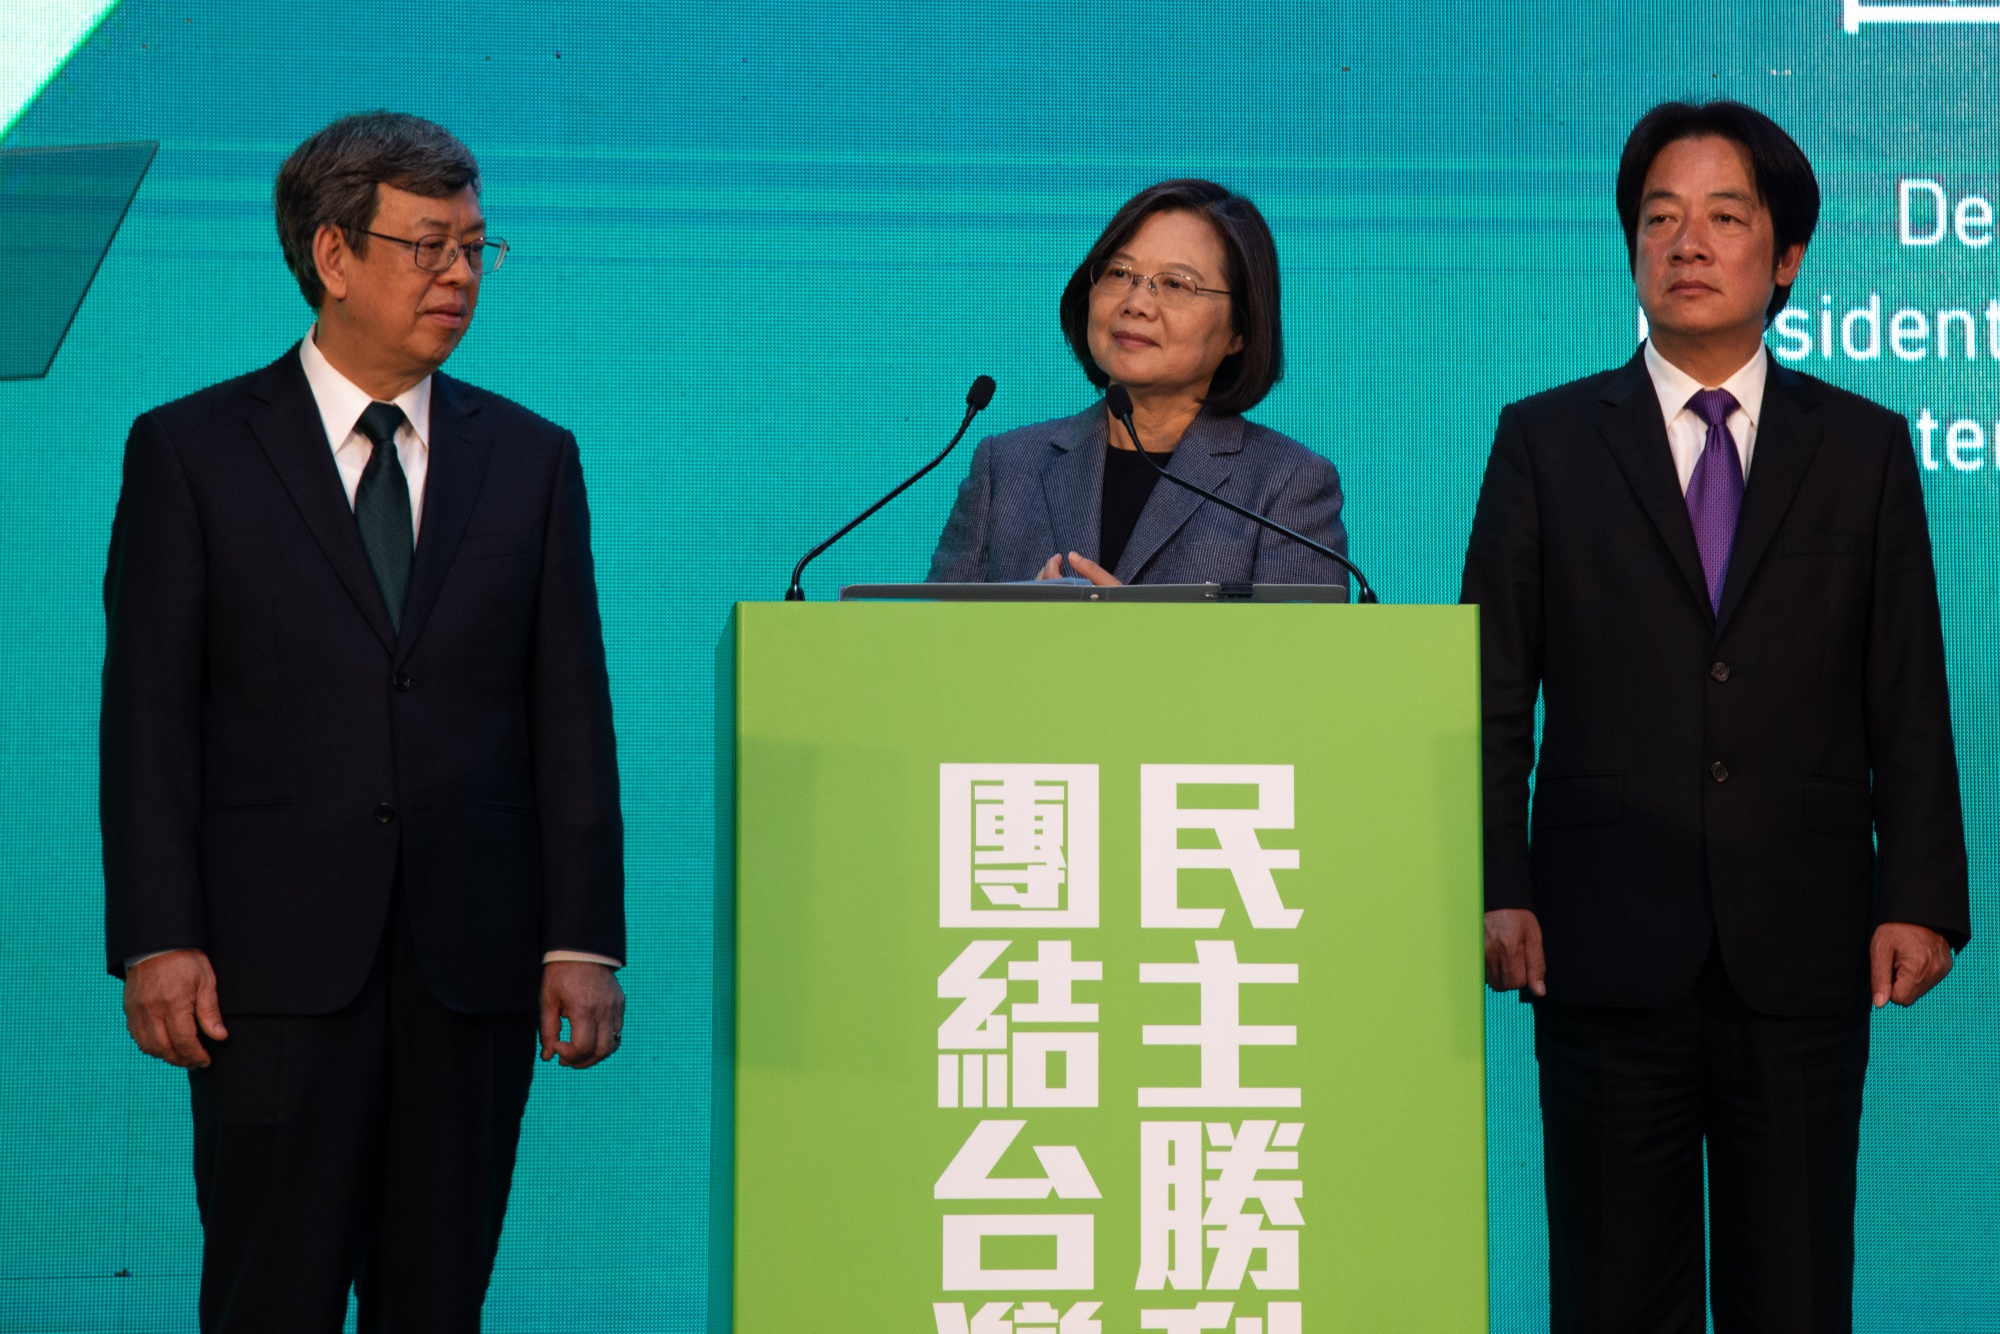 Tsai Ing-wen, center, pauses while speaking during a news conference in Taipei, on Jan. 11.